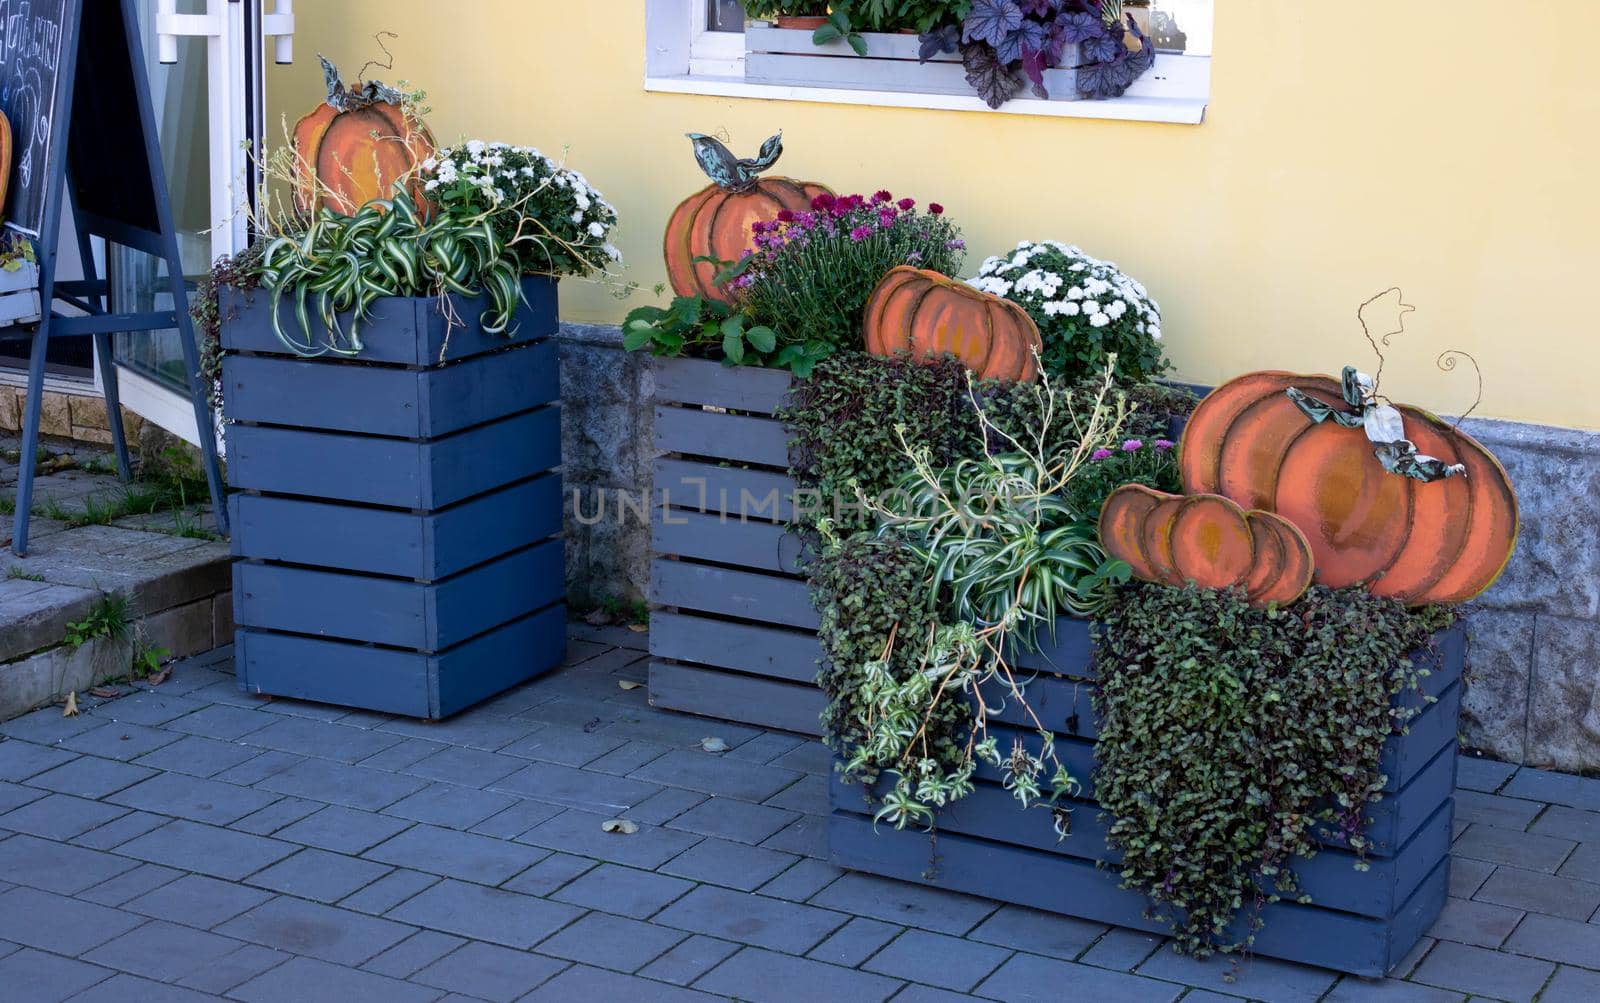 Decoration in the yard for Halloween.Orange wooden pumpkins, flowers in gray wooden boxes.